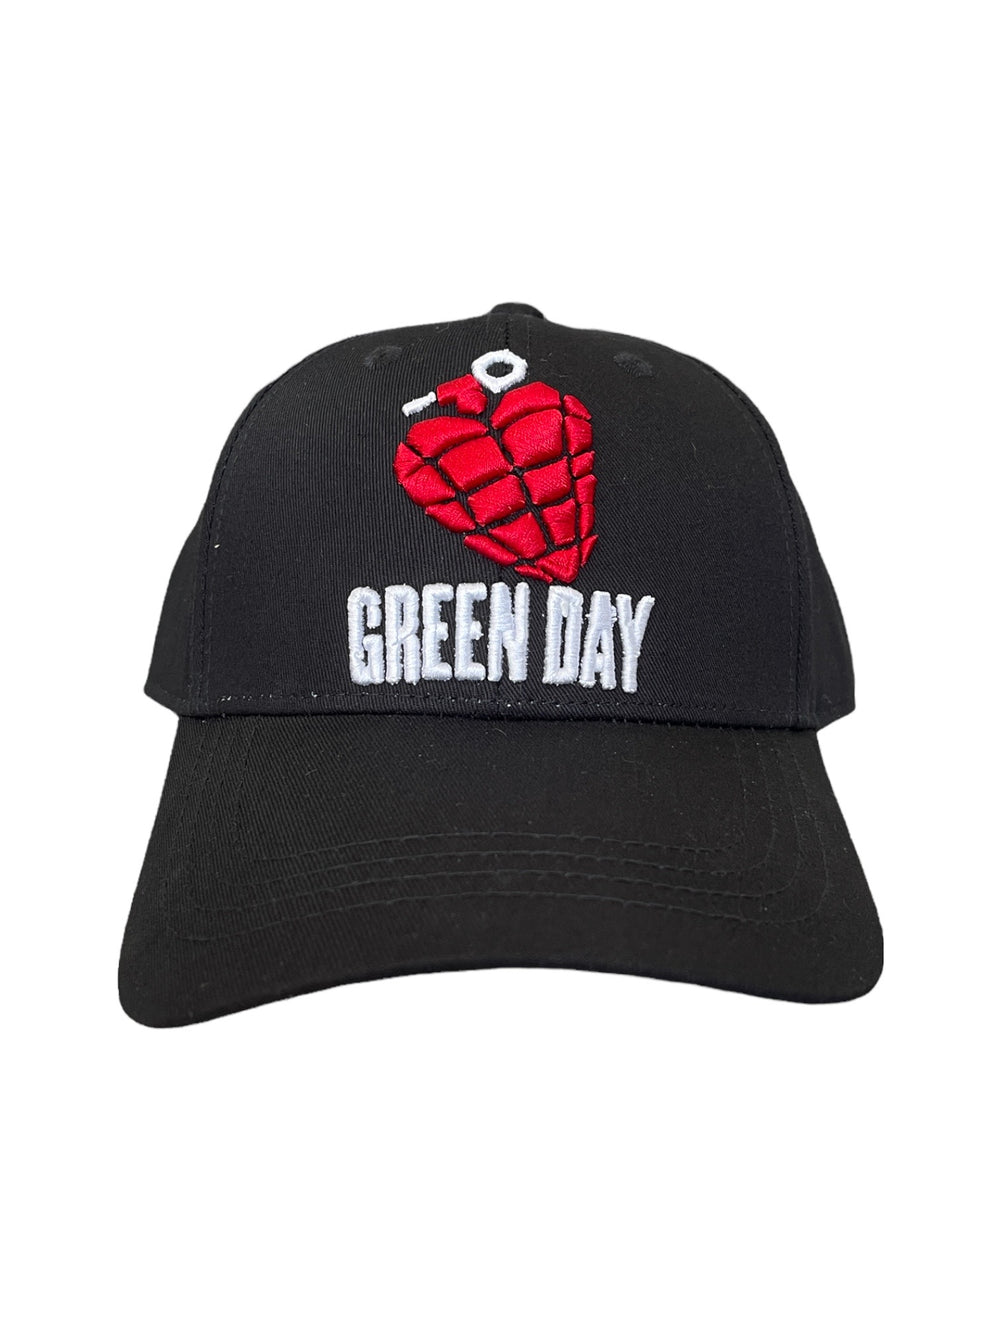 Green Day Grenade Official Embroidered Peak Cap Adjustable